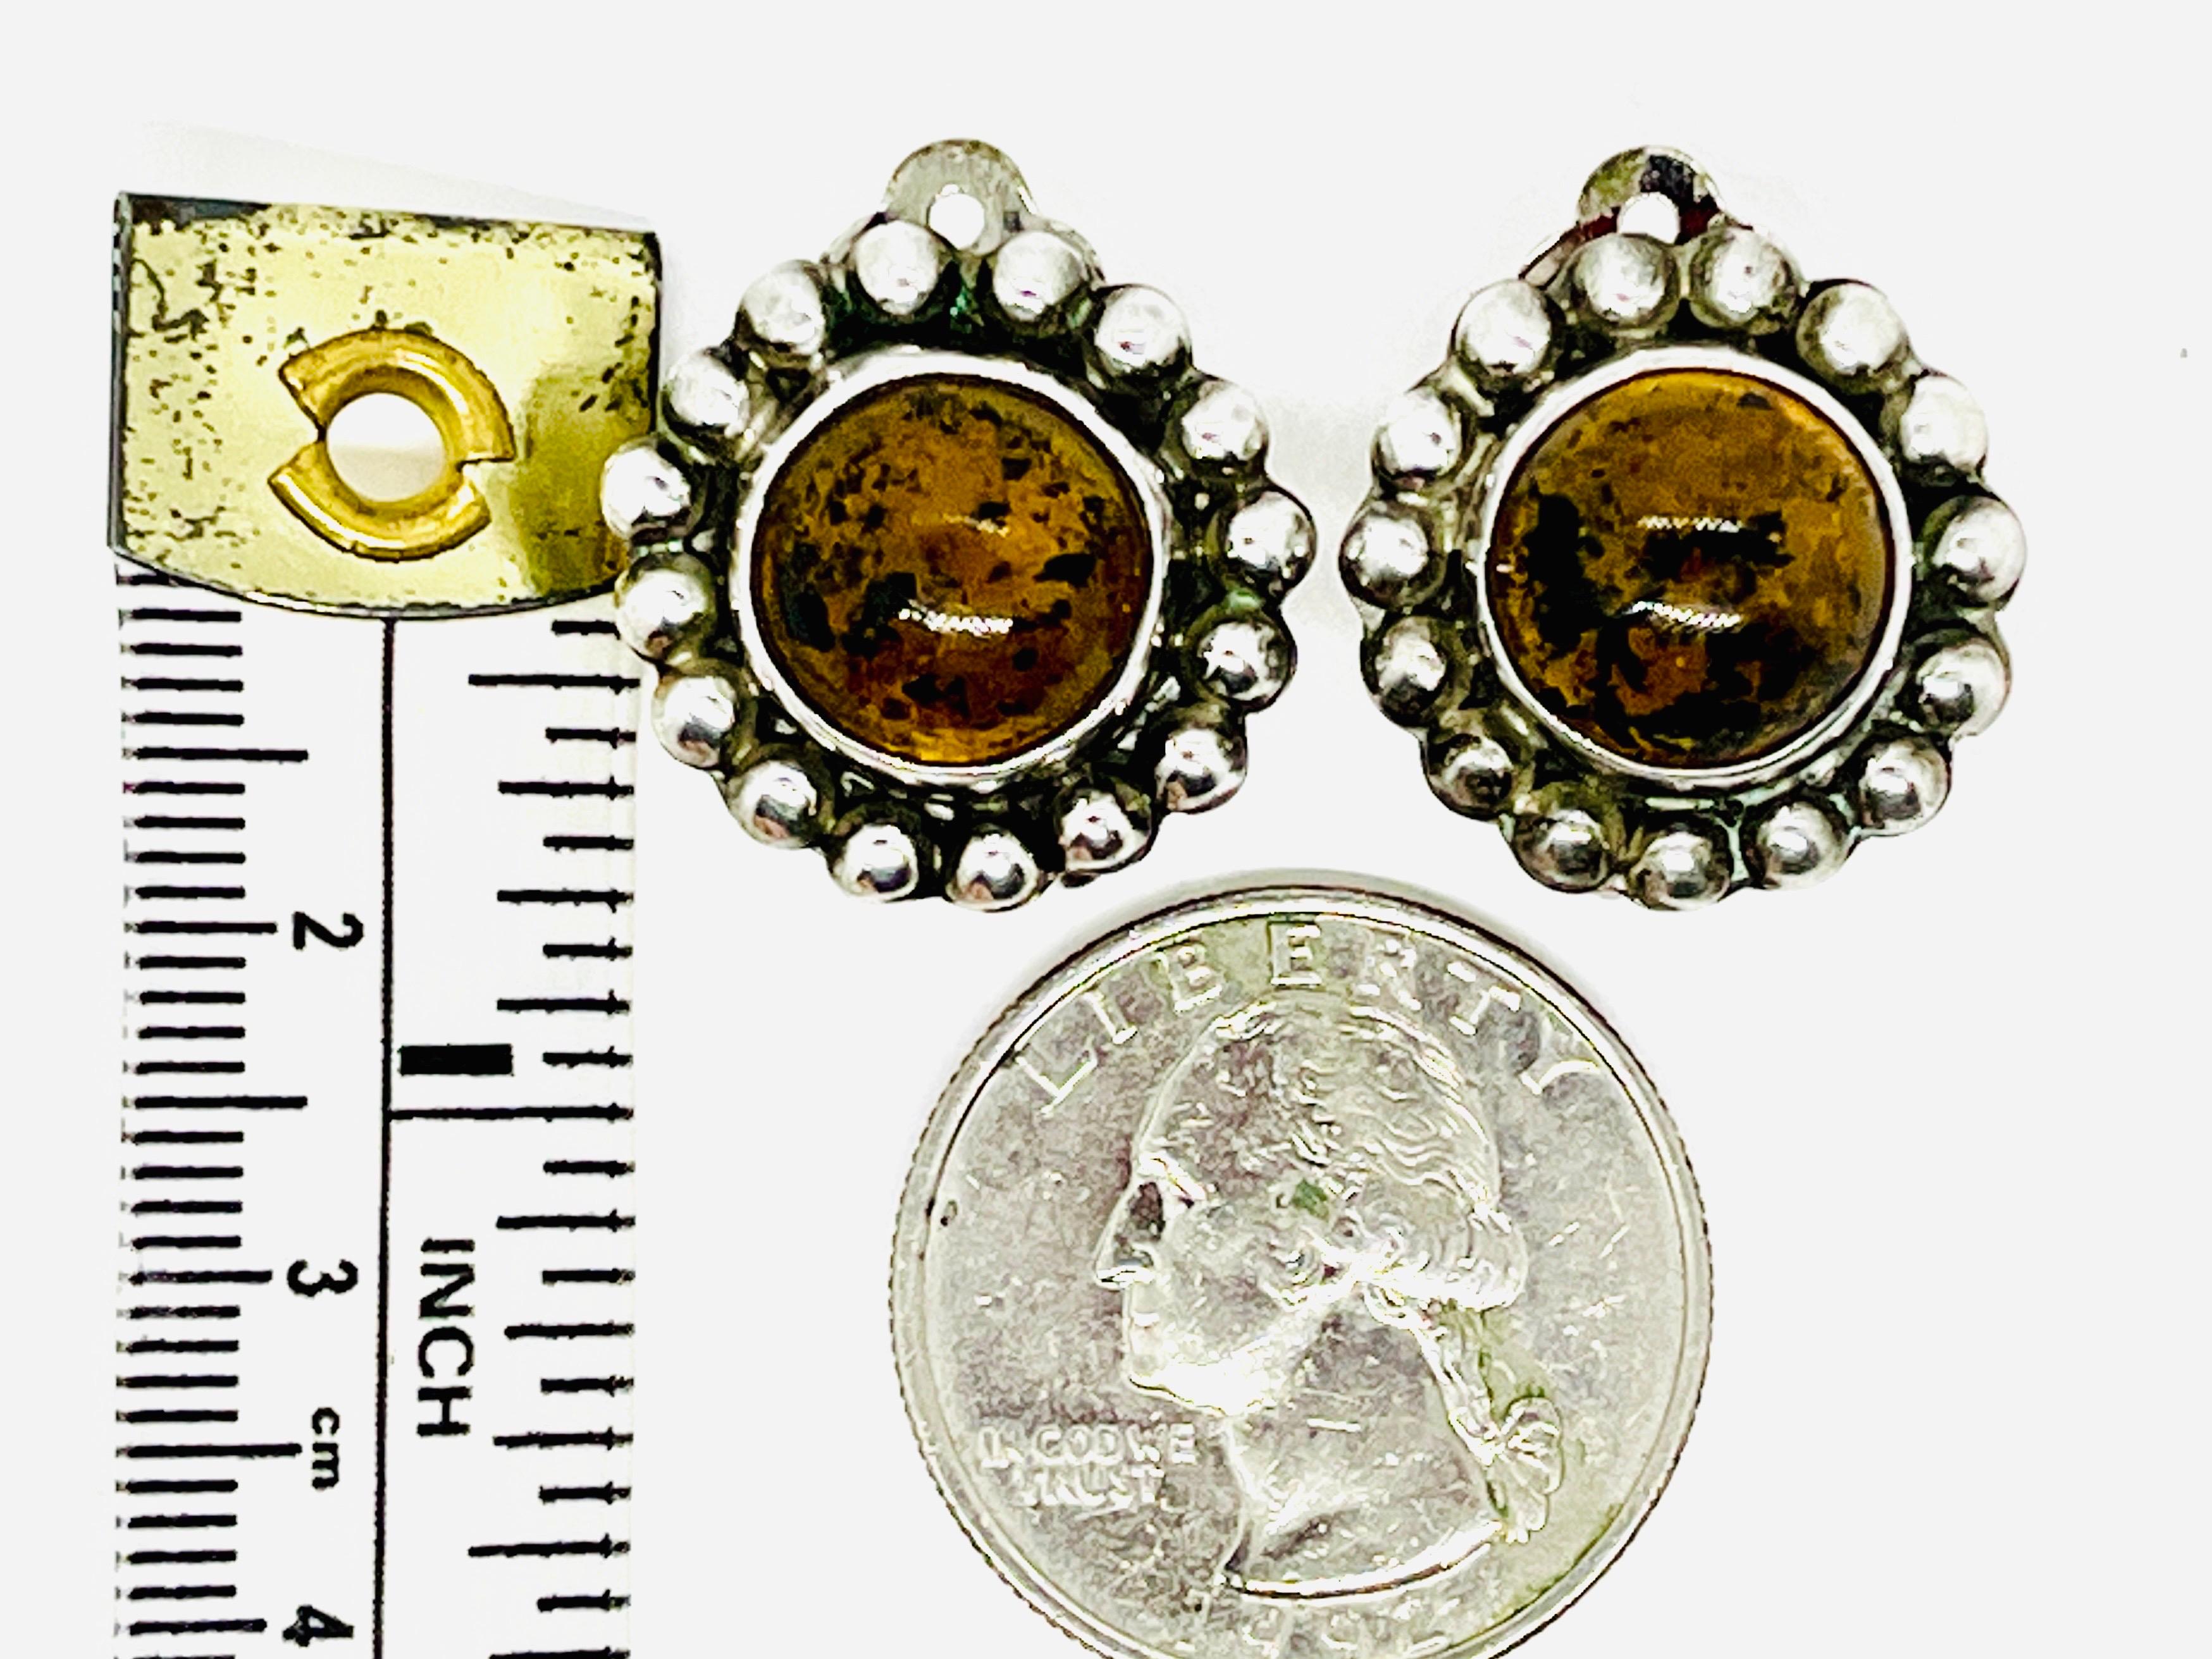 Pair of Chiapas yellow amber cabochon inlayed Taxco silver earrings with silver ball halo detail. 925 Mexican silver. One earring is marked “MEX TT-47 MEX” The second is marked “MEX TT-47 925”.

The first letter, T, is the city letter for Taxco. The